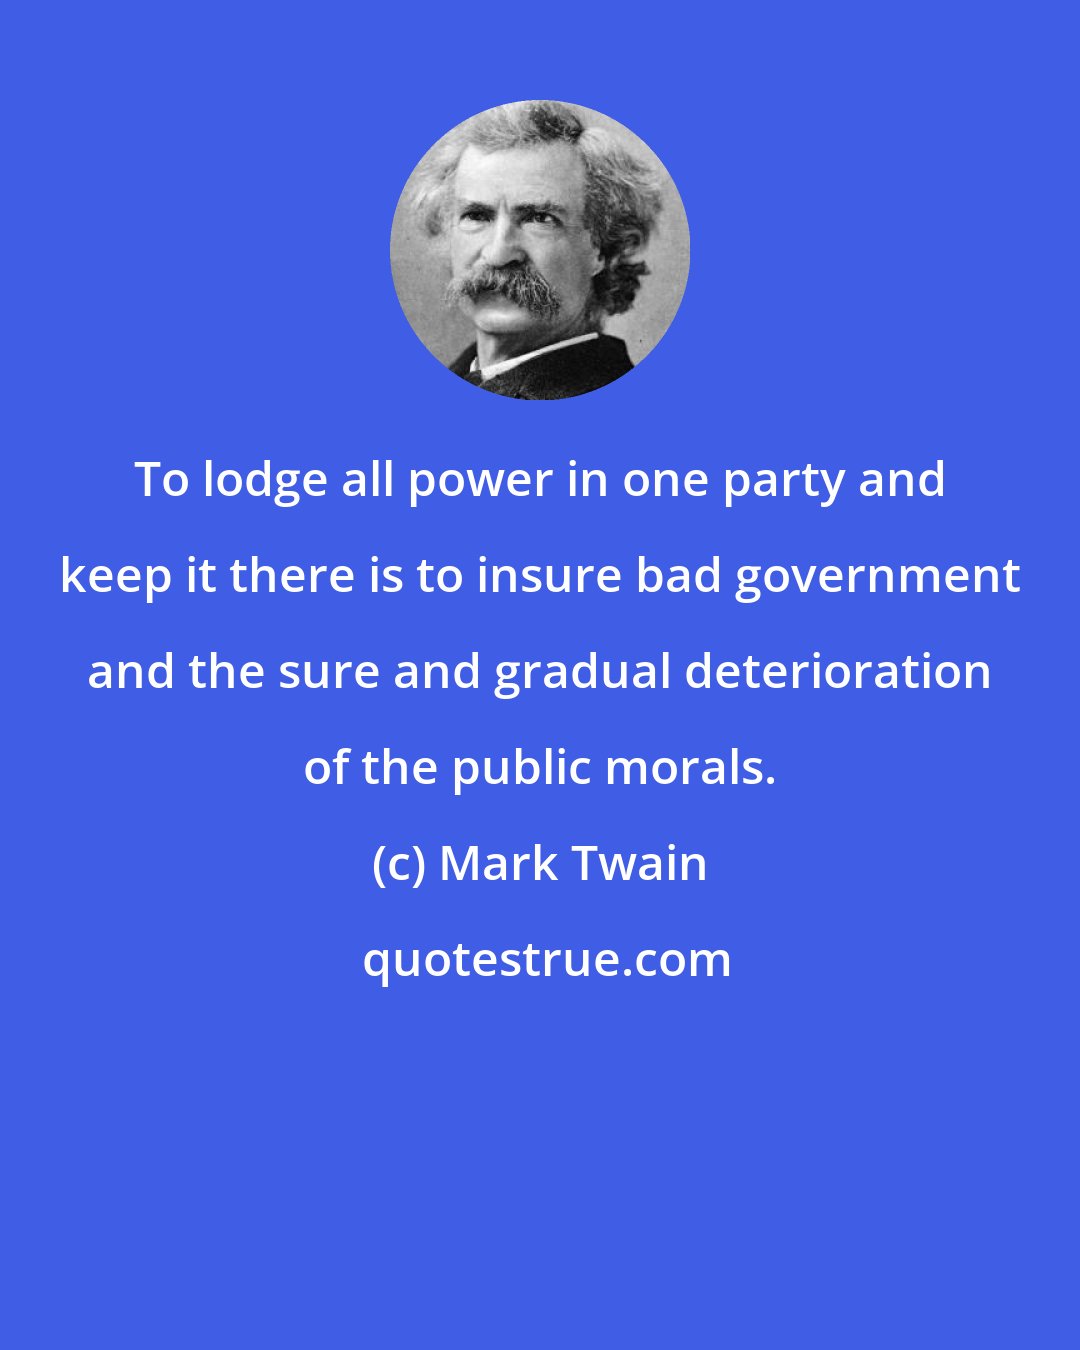 Mark Twain: To lodge all power in one party and keep it there is to insure bad government and the sure and gradual deterioration of the public morals.